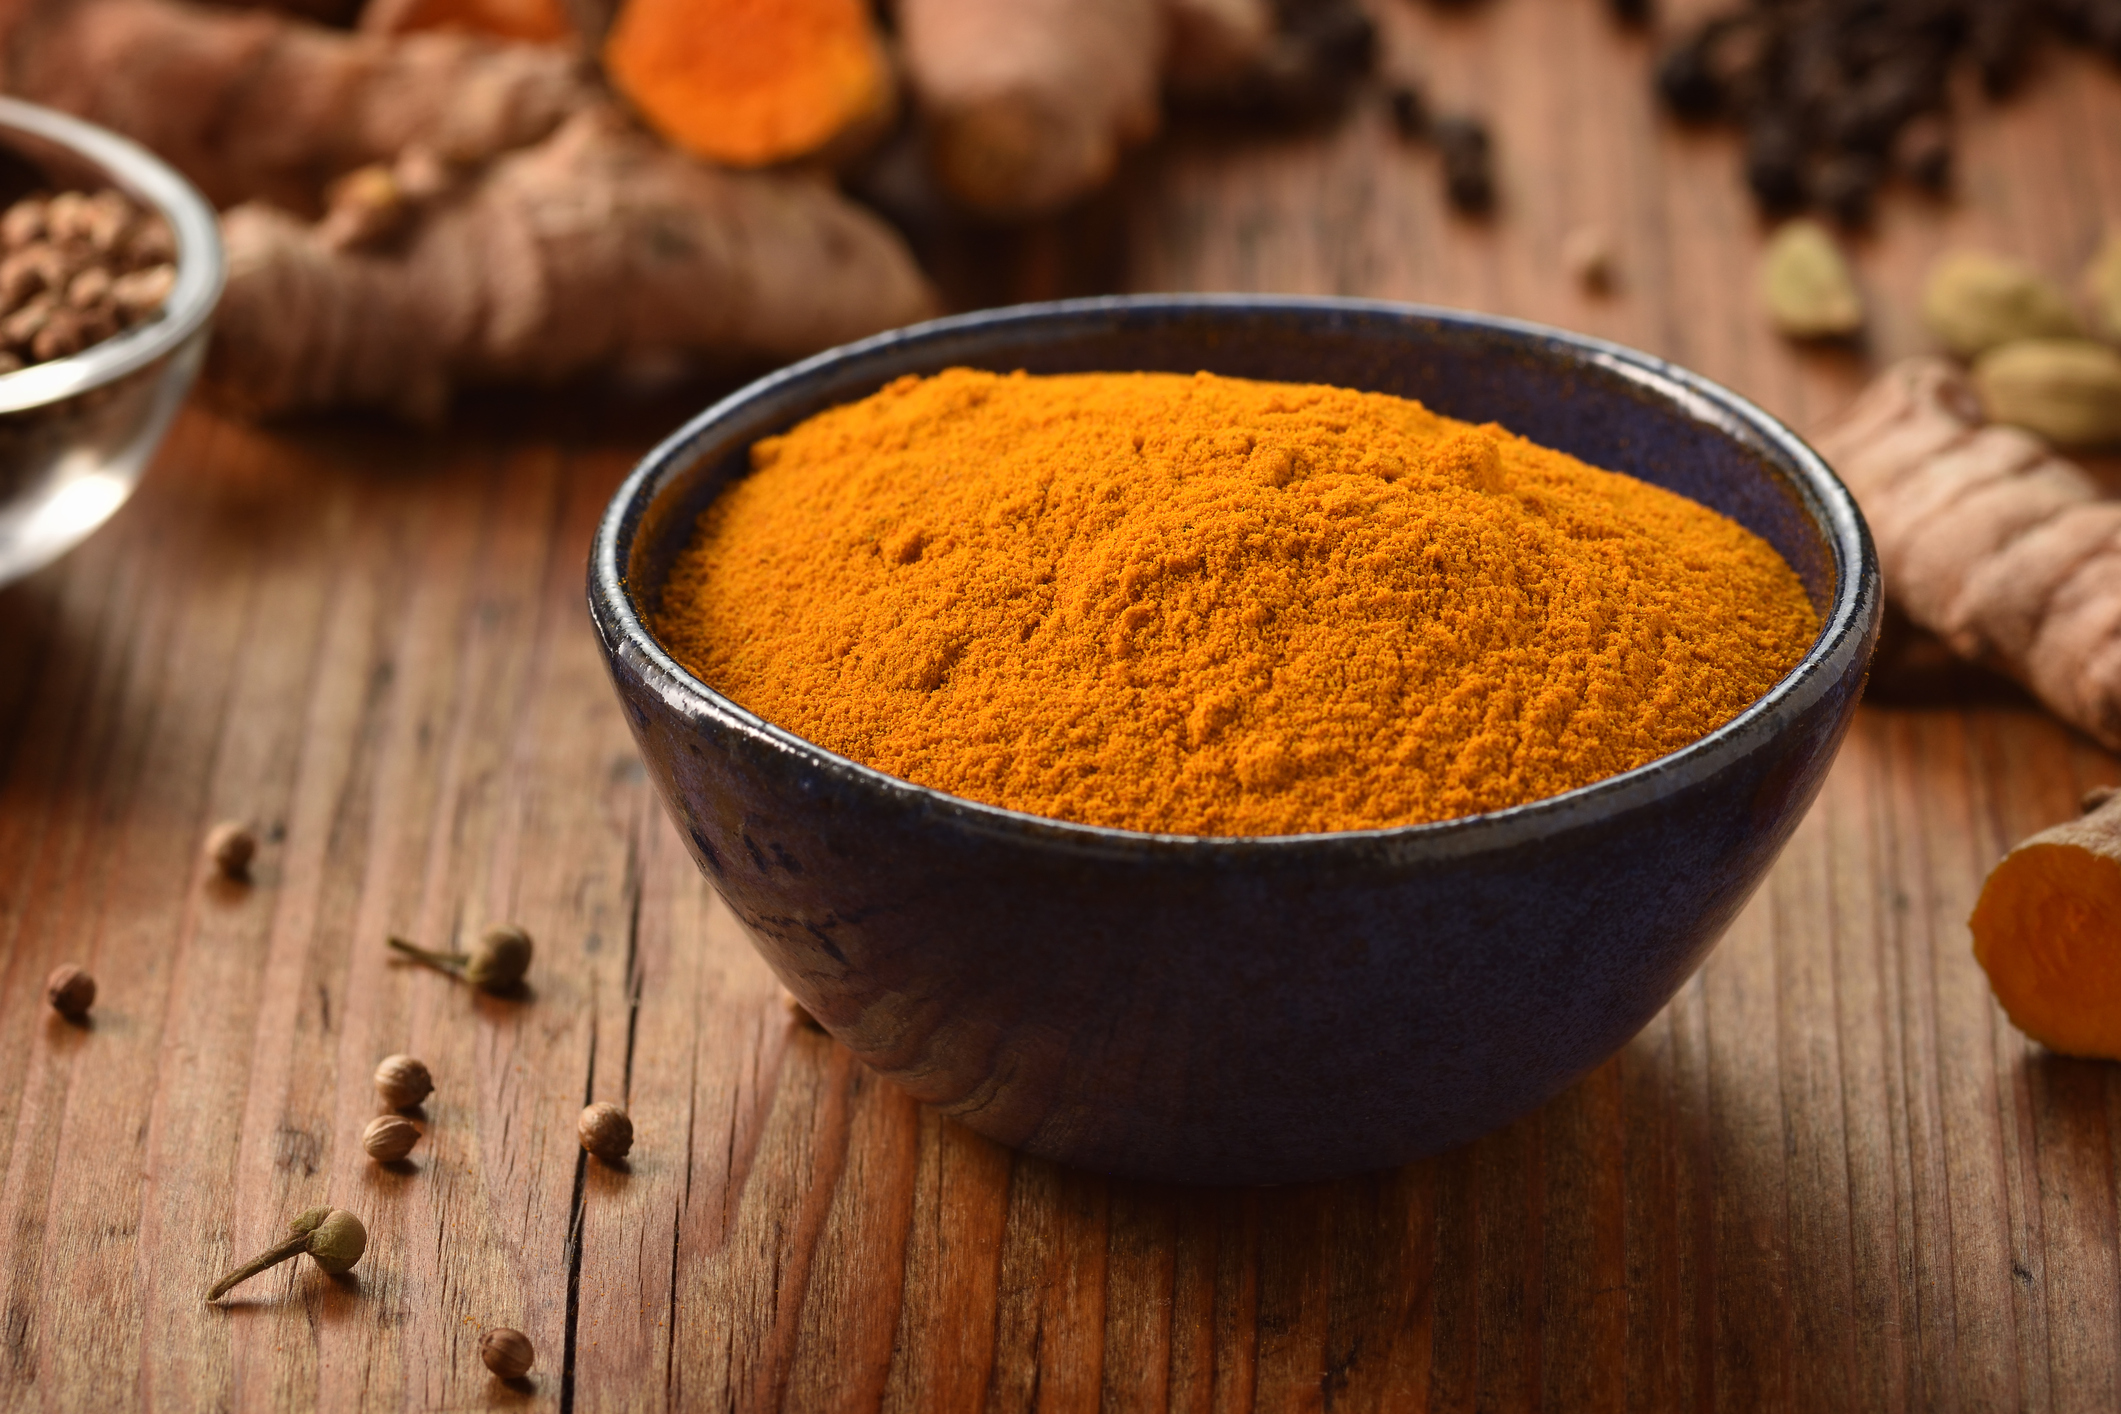 Tumeric in a bowl on wooden background.